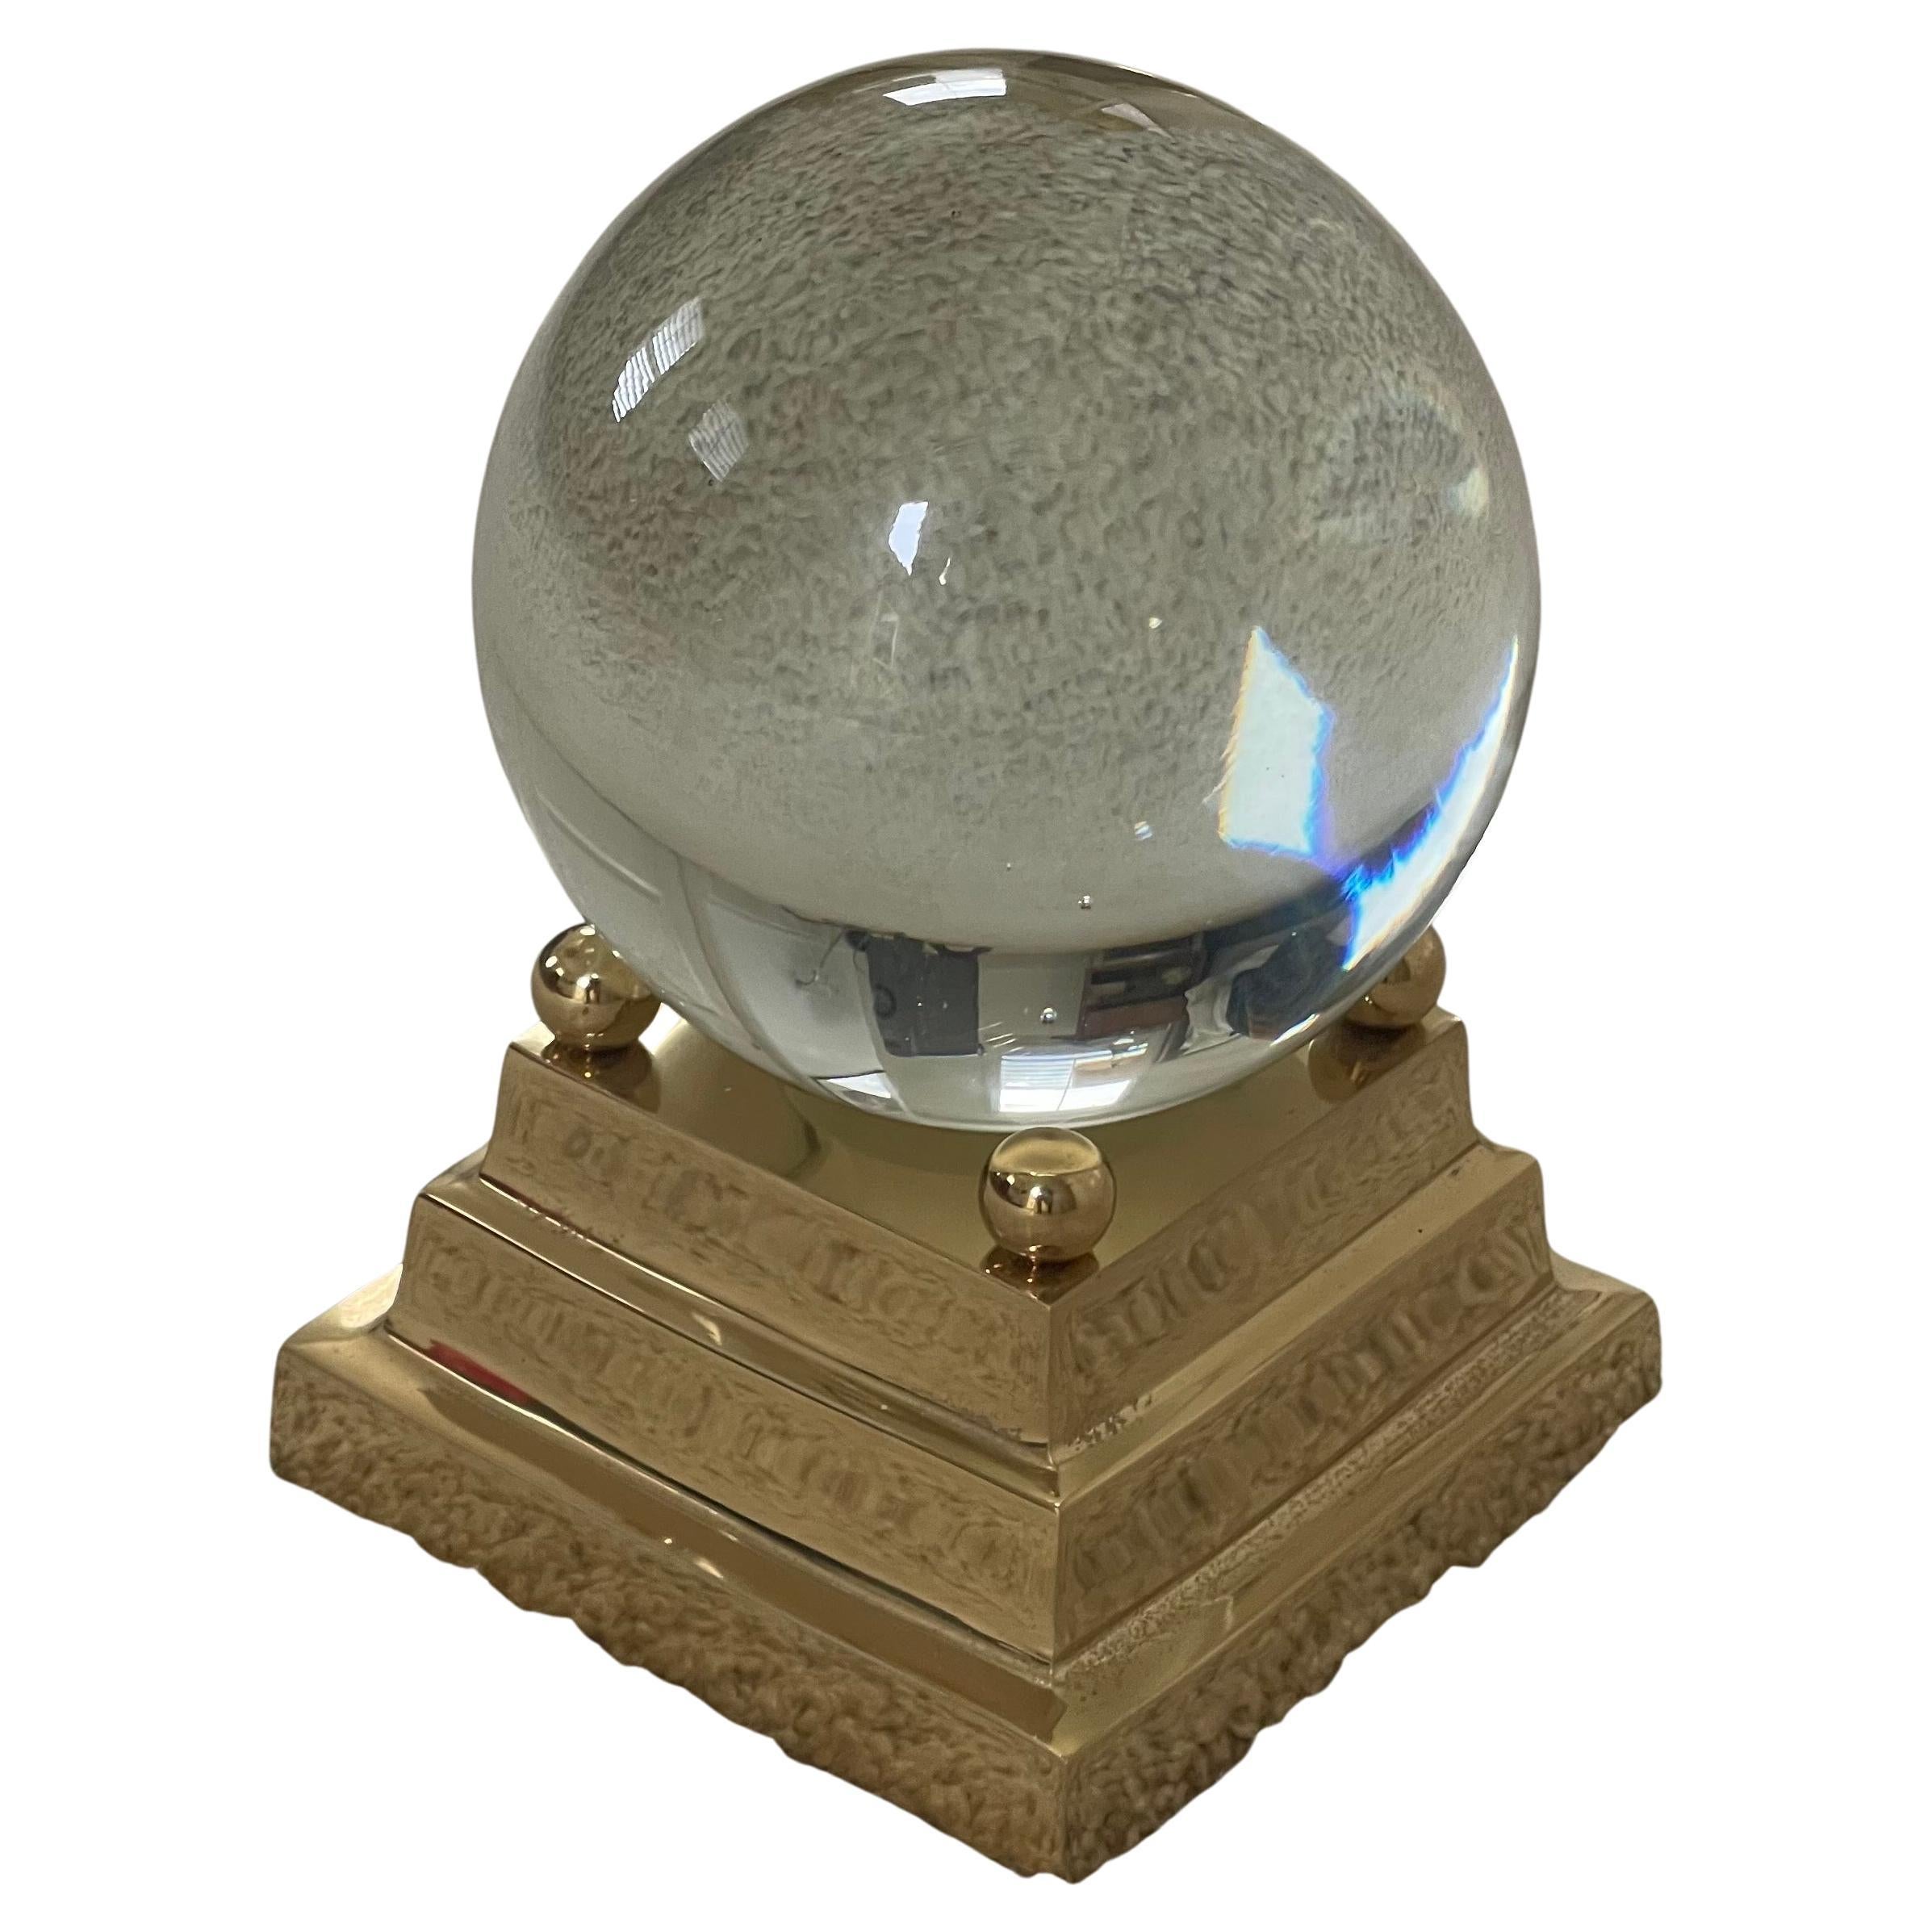 Decorative crystal sphere on brass base, circa 1970s. The piece is in very good condition with no chips or cracks; it has a nice polished finish with four supports in the corners of the base to hold the sphere in place.  The sphere measures 4